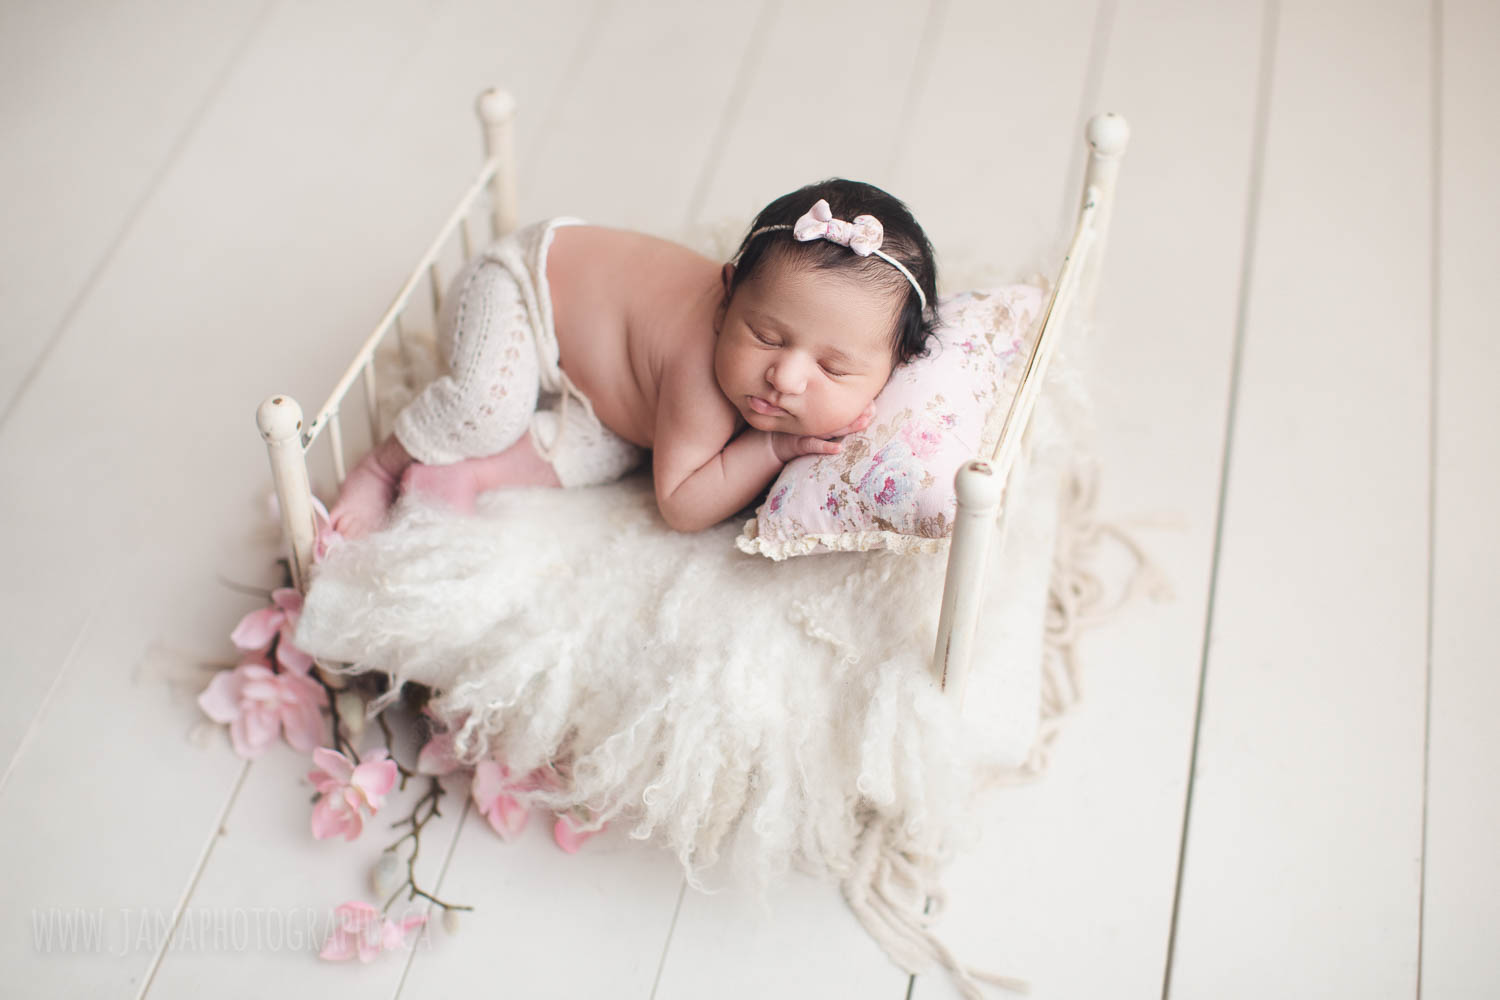 newborn photography - baby girl sleeping in a white bed